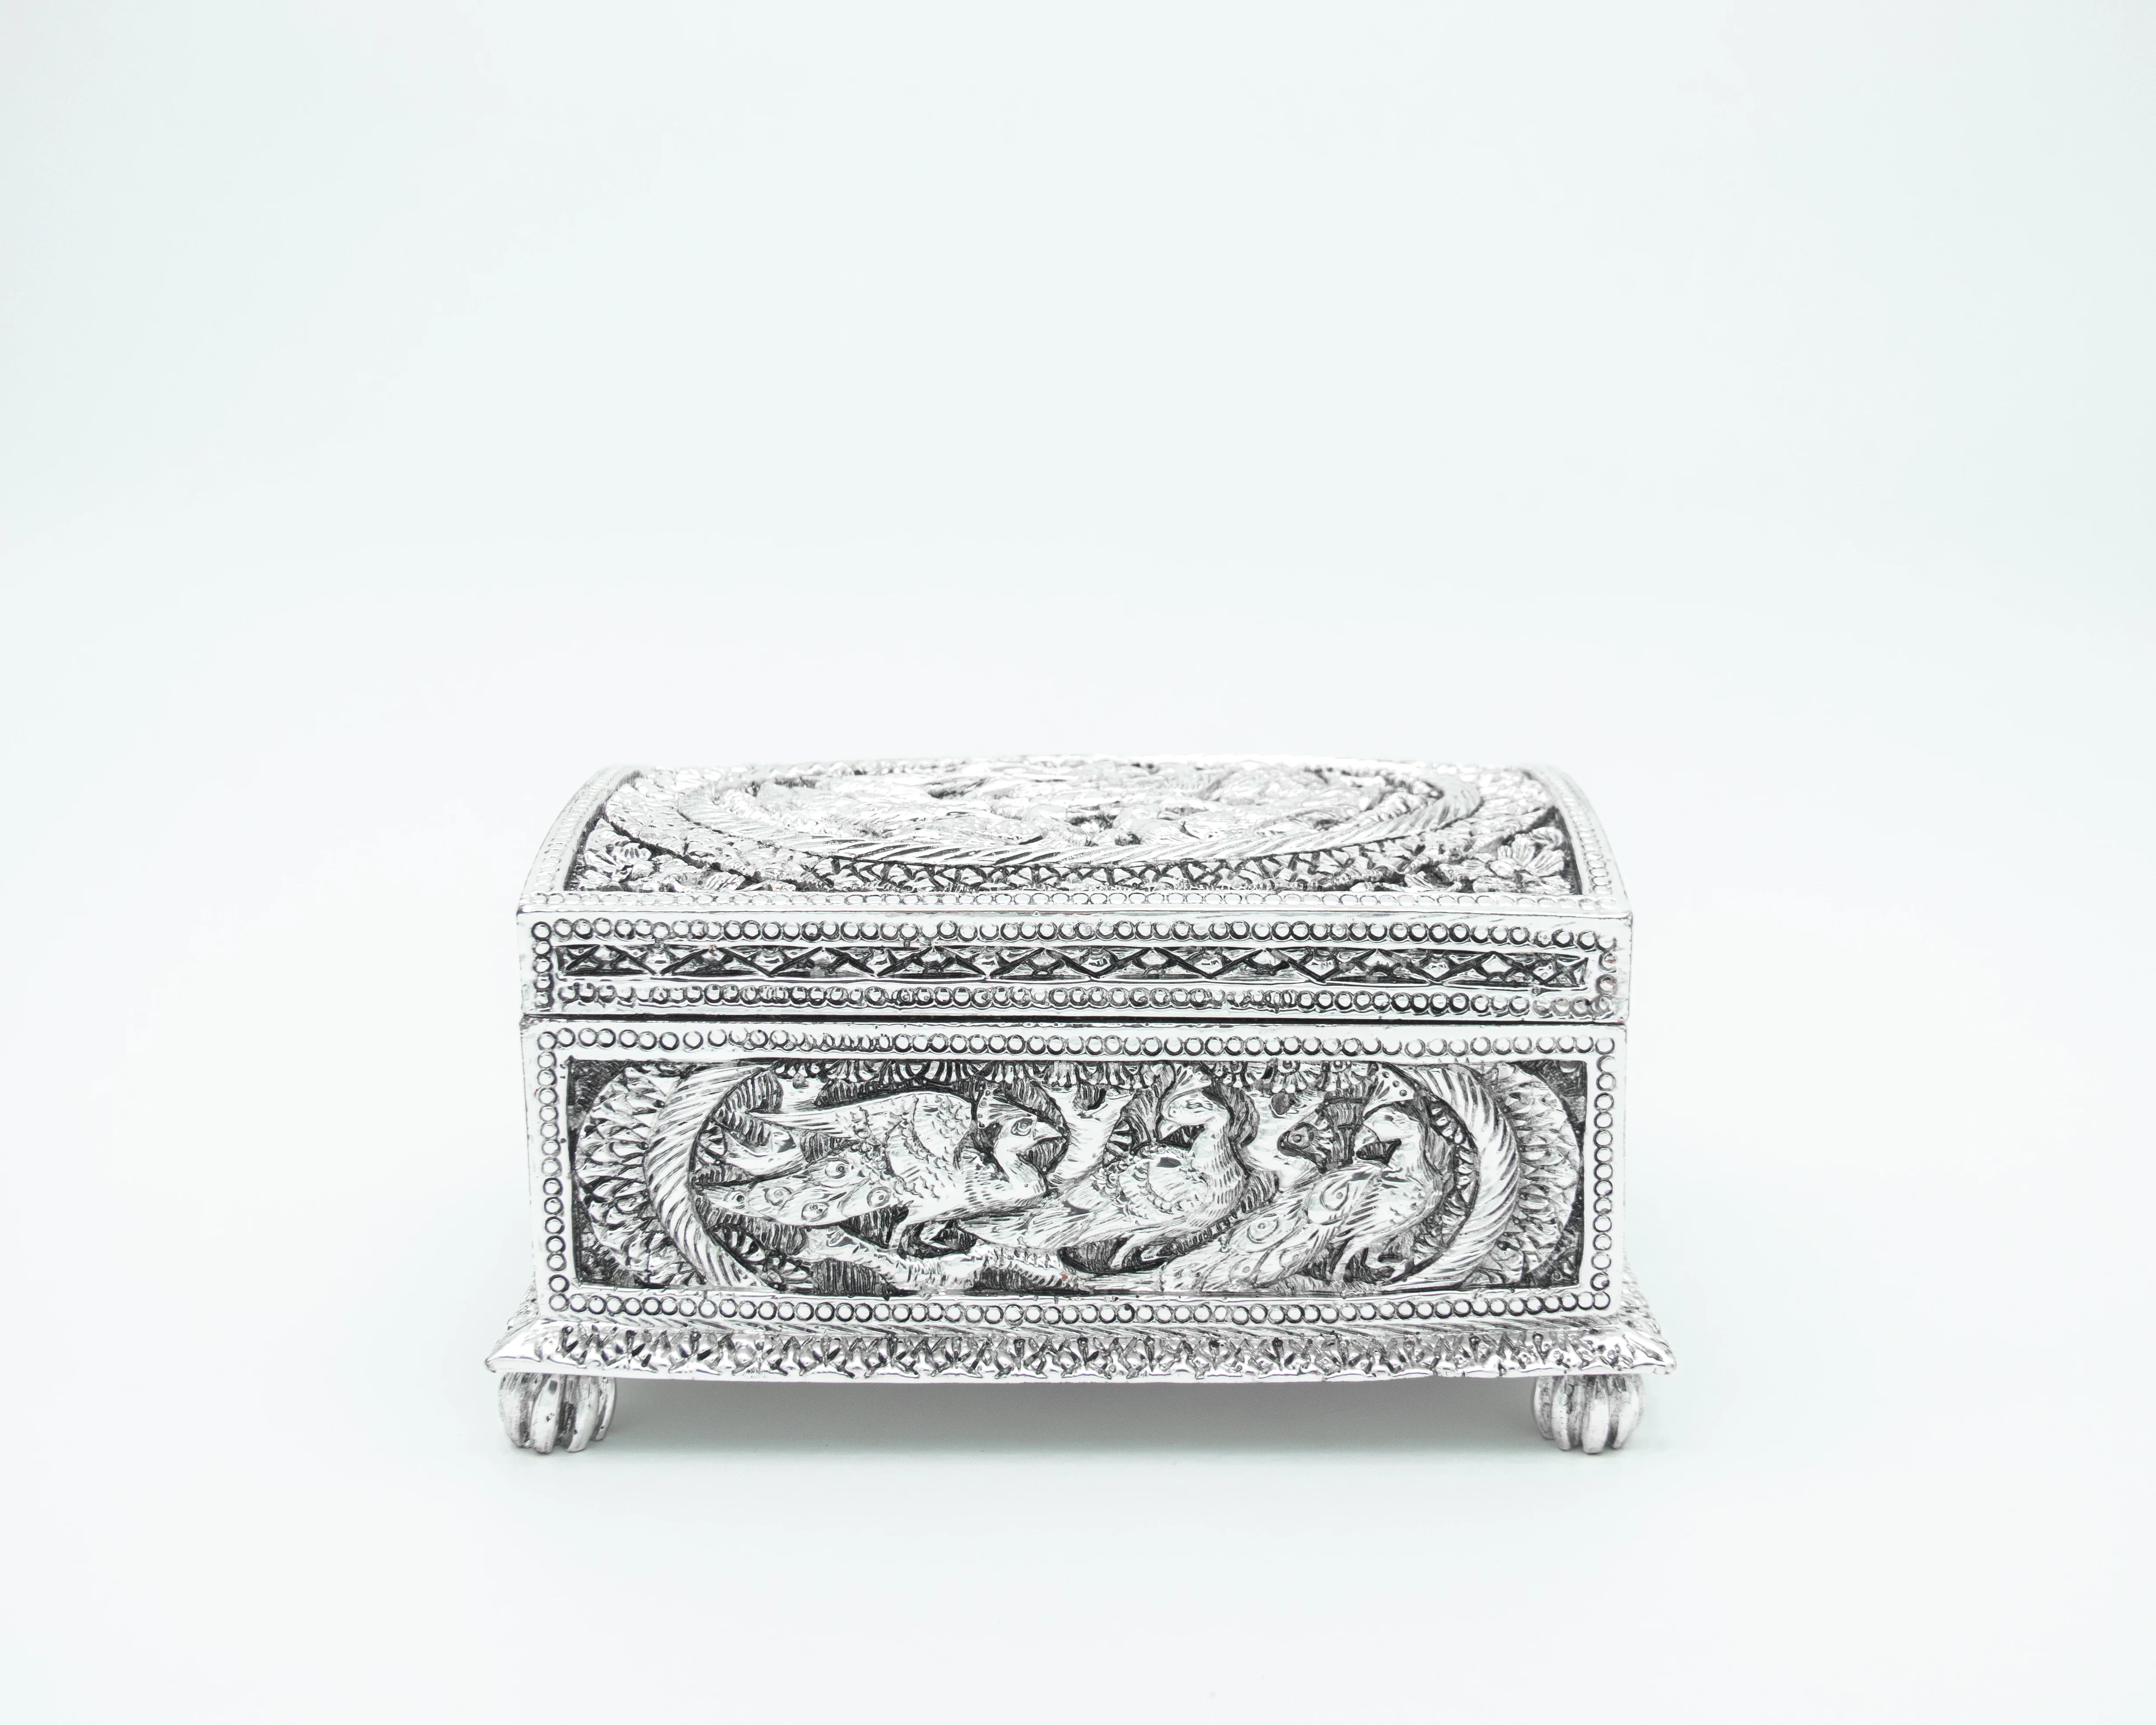 Premium Silver Plated Jewelry Organizer Box | Handcrafted Resin Box